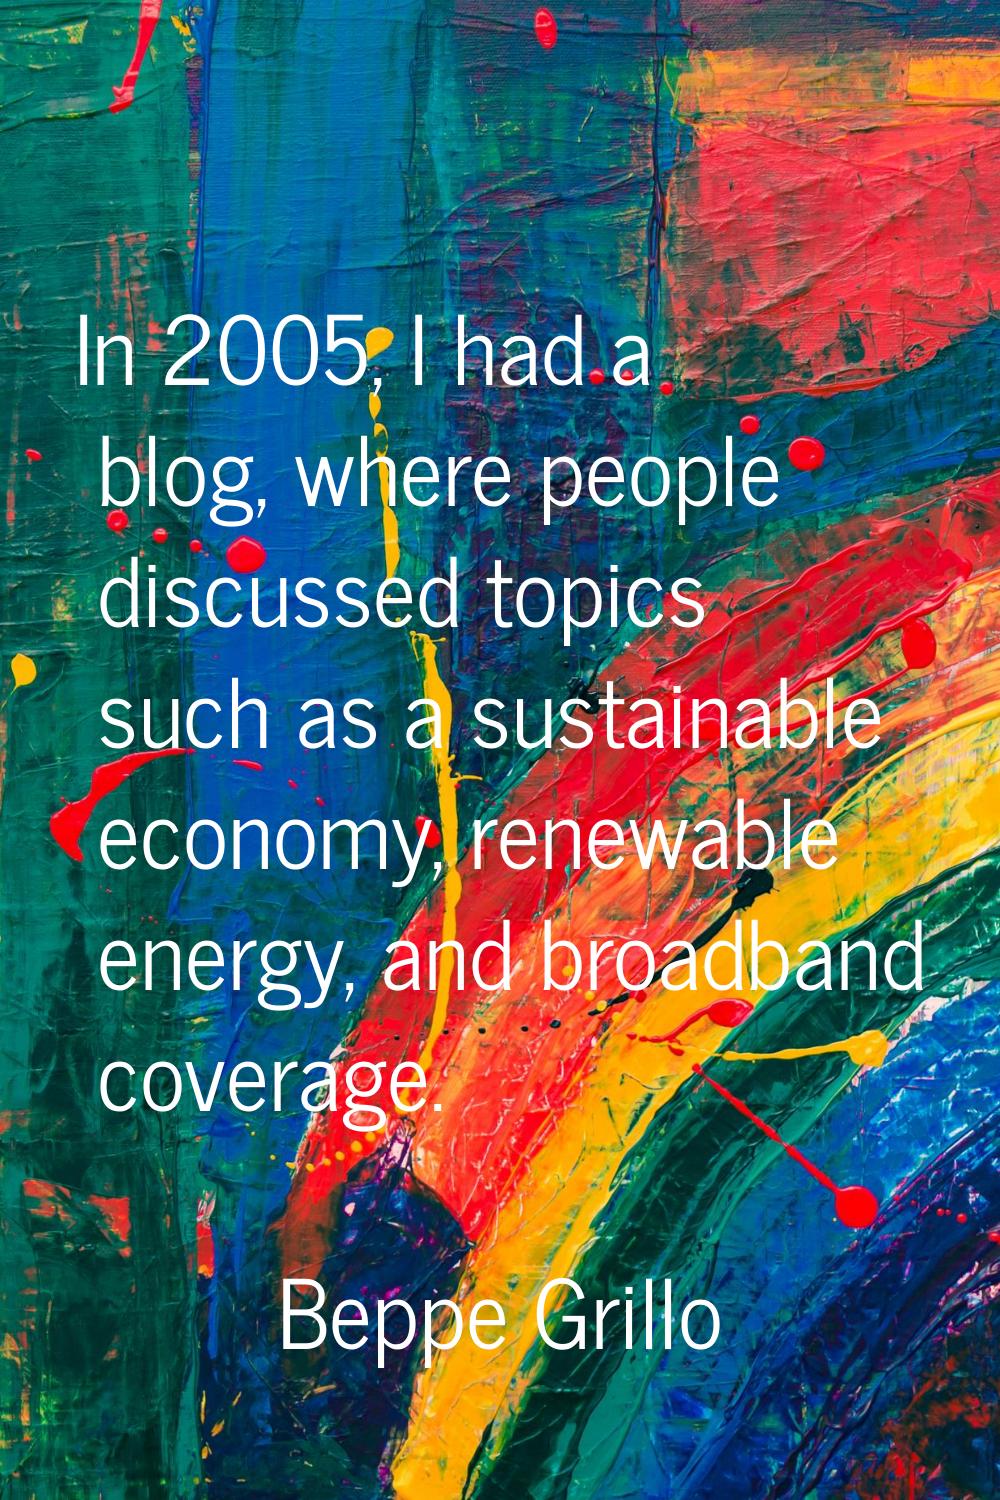 In 2005, I had a blog, where people discussed topics such as a sustainable economy, renewable energ